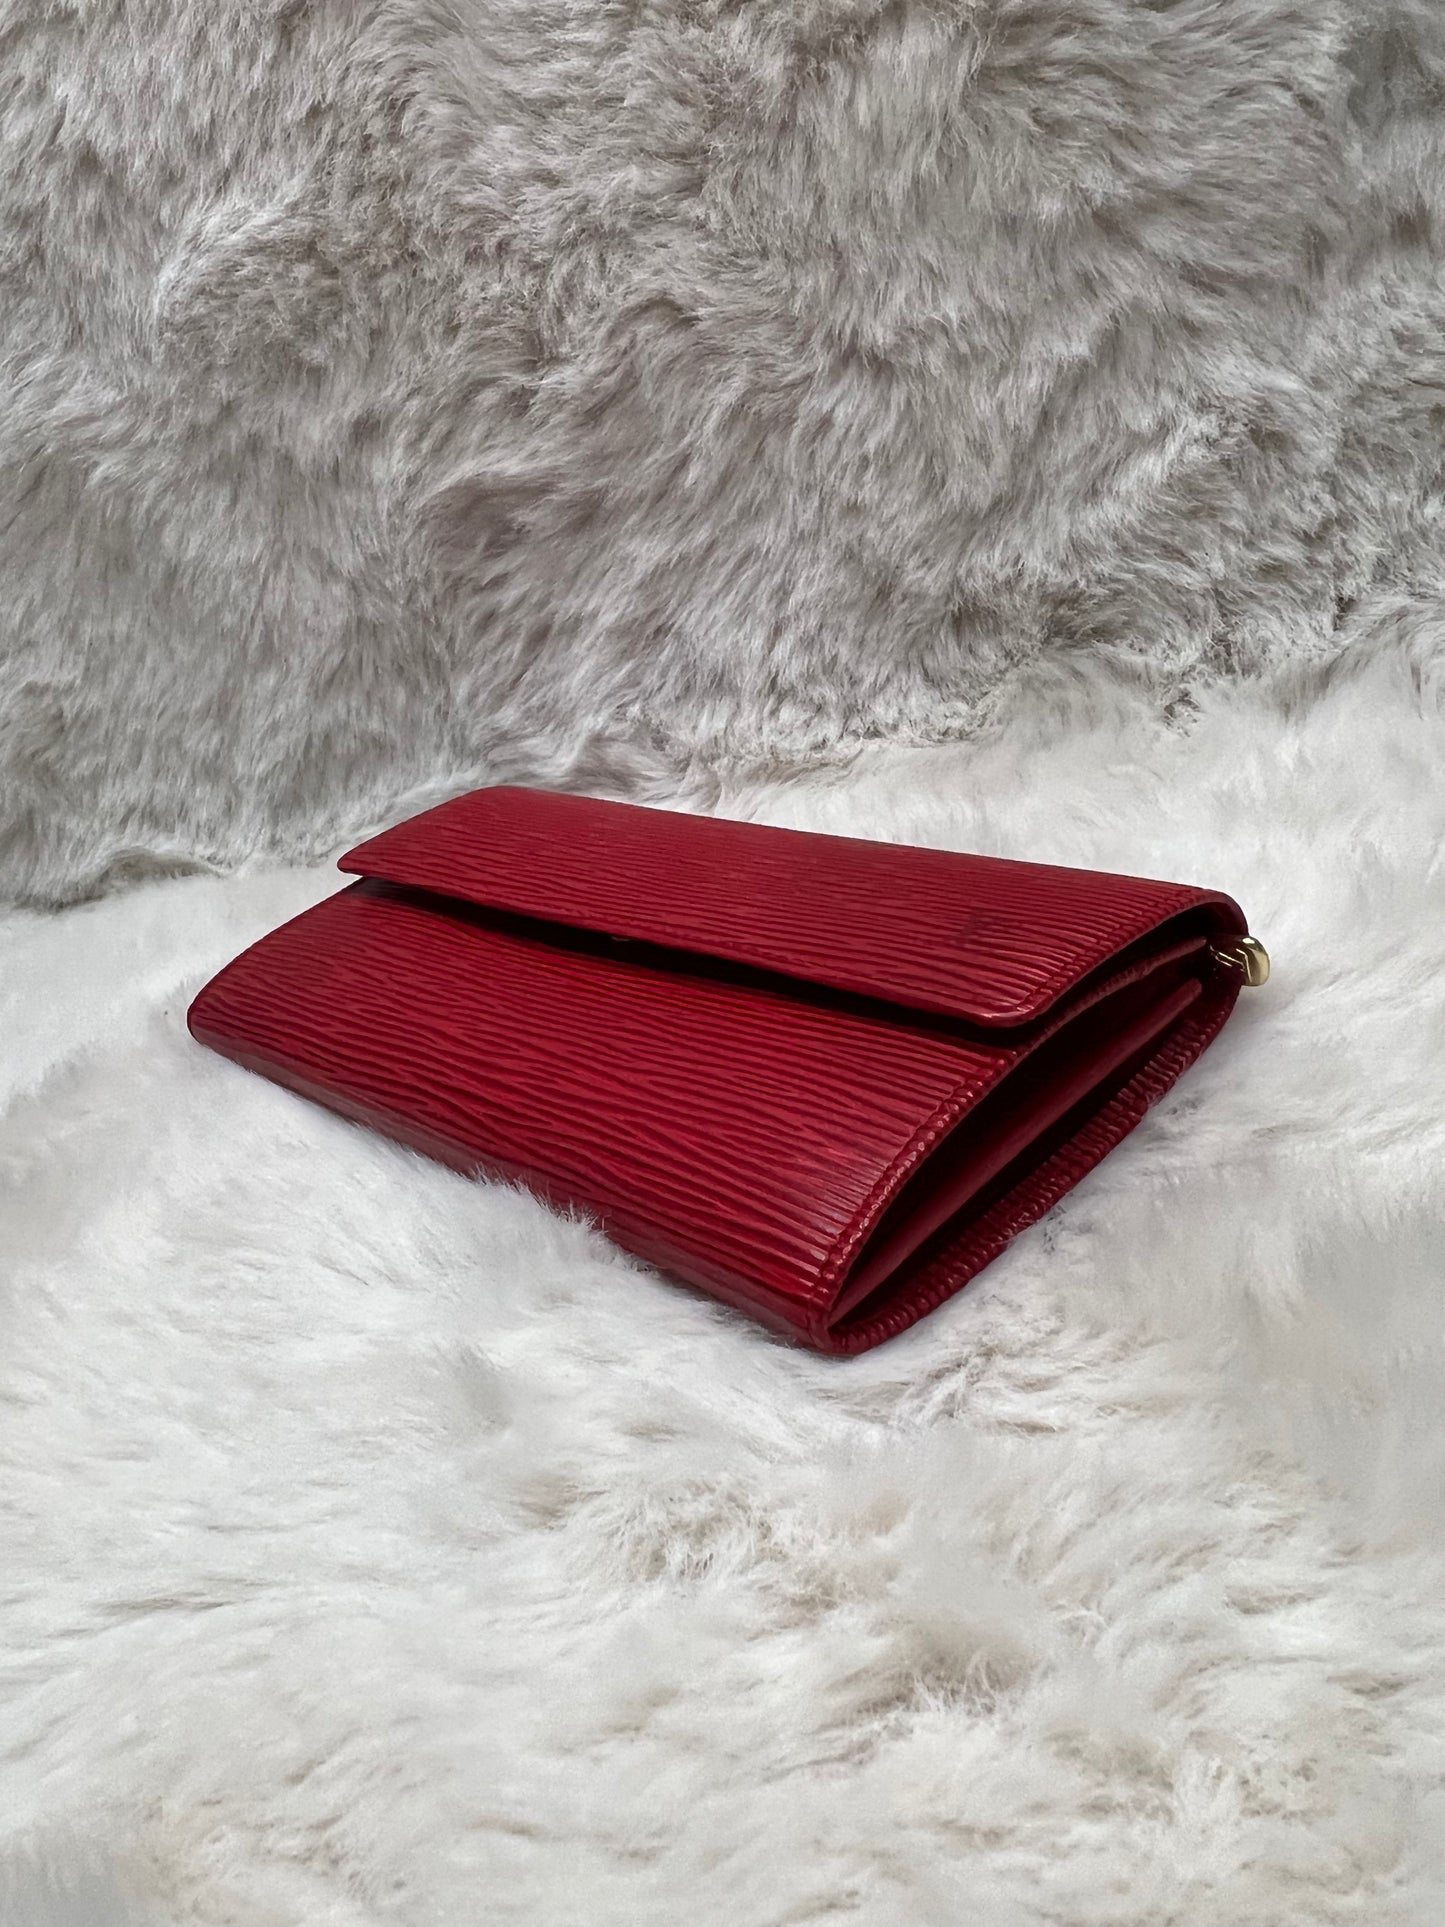 Epi Leather Portefeuille Long Wallet - Pink - $250 plus $10 shipping